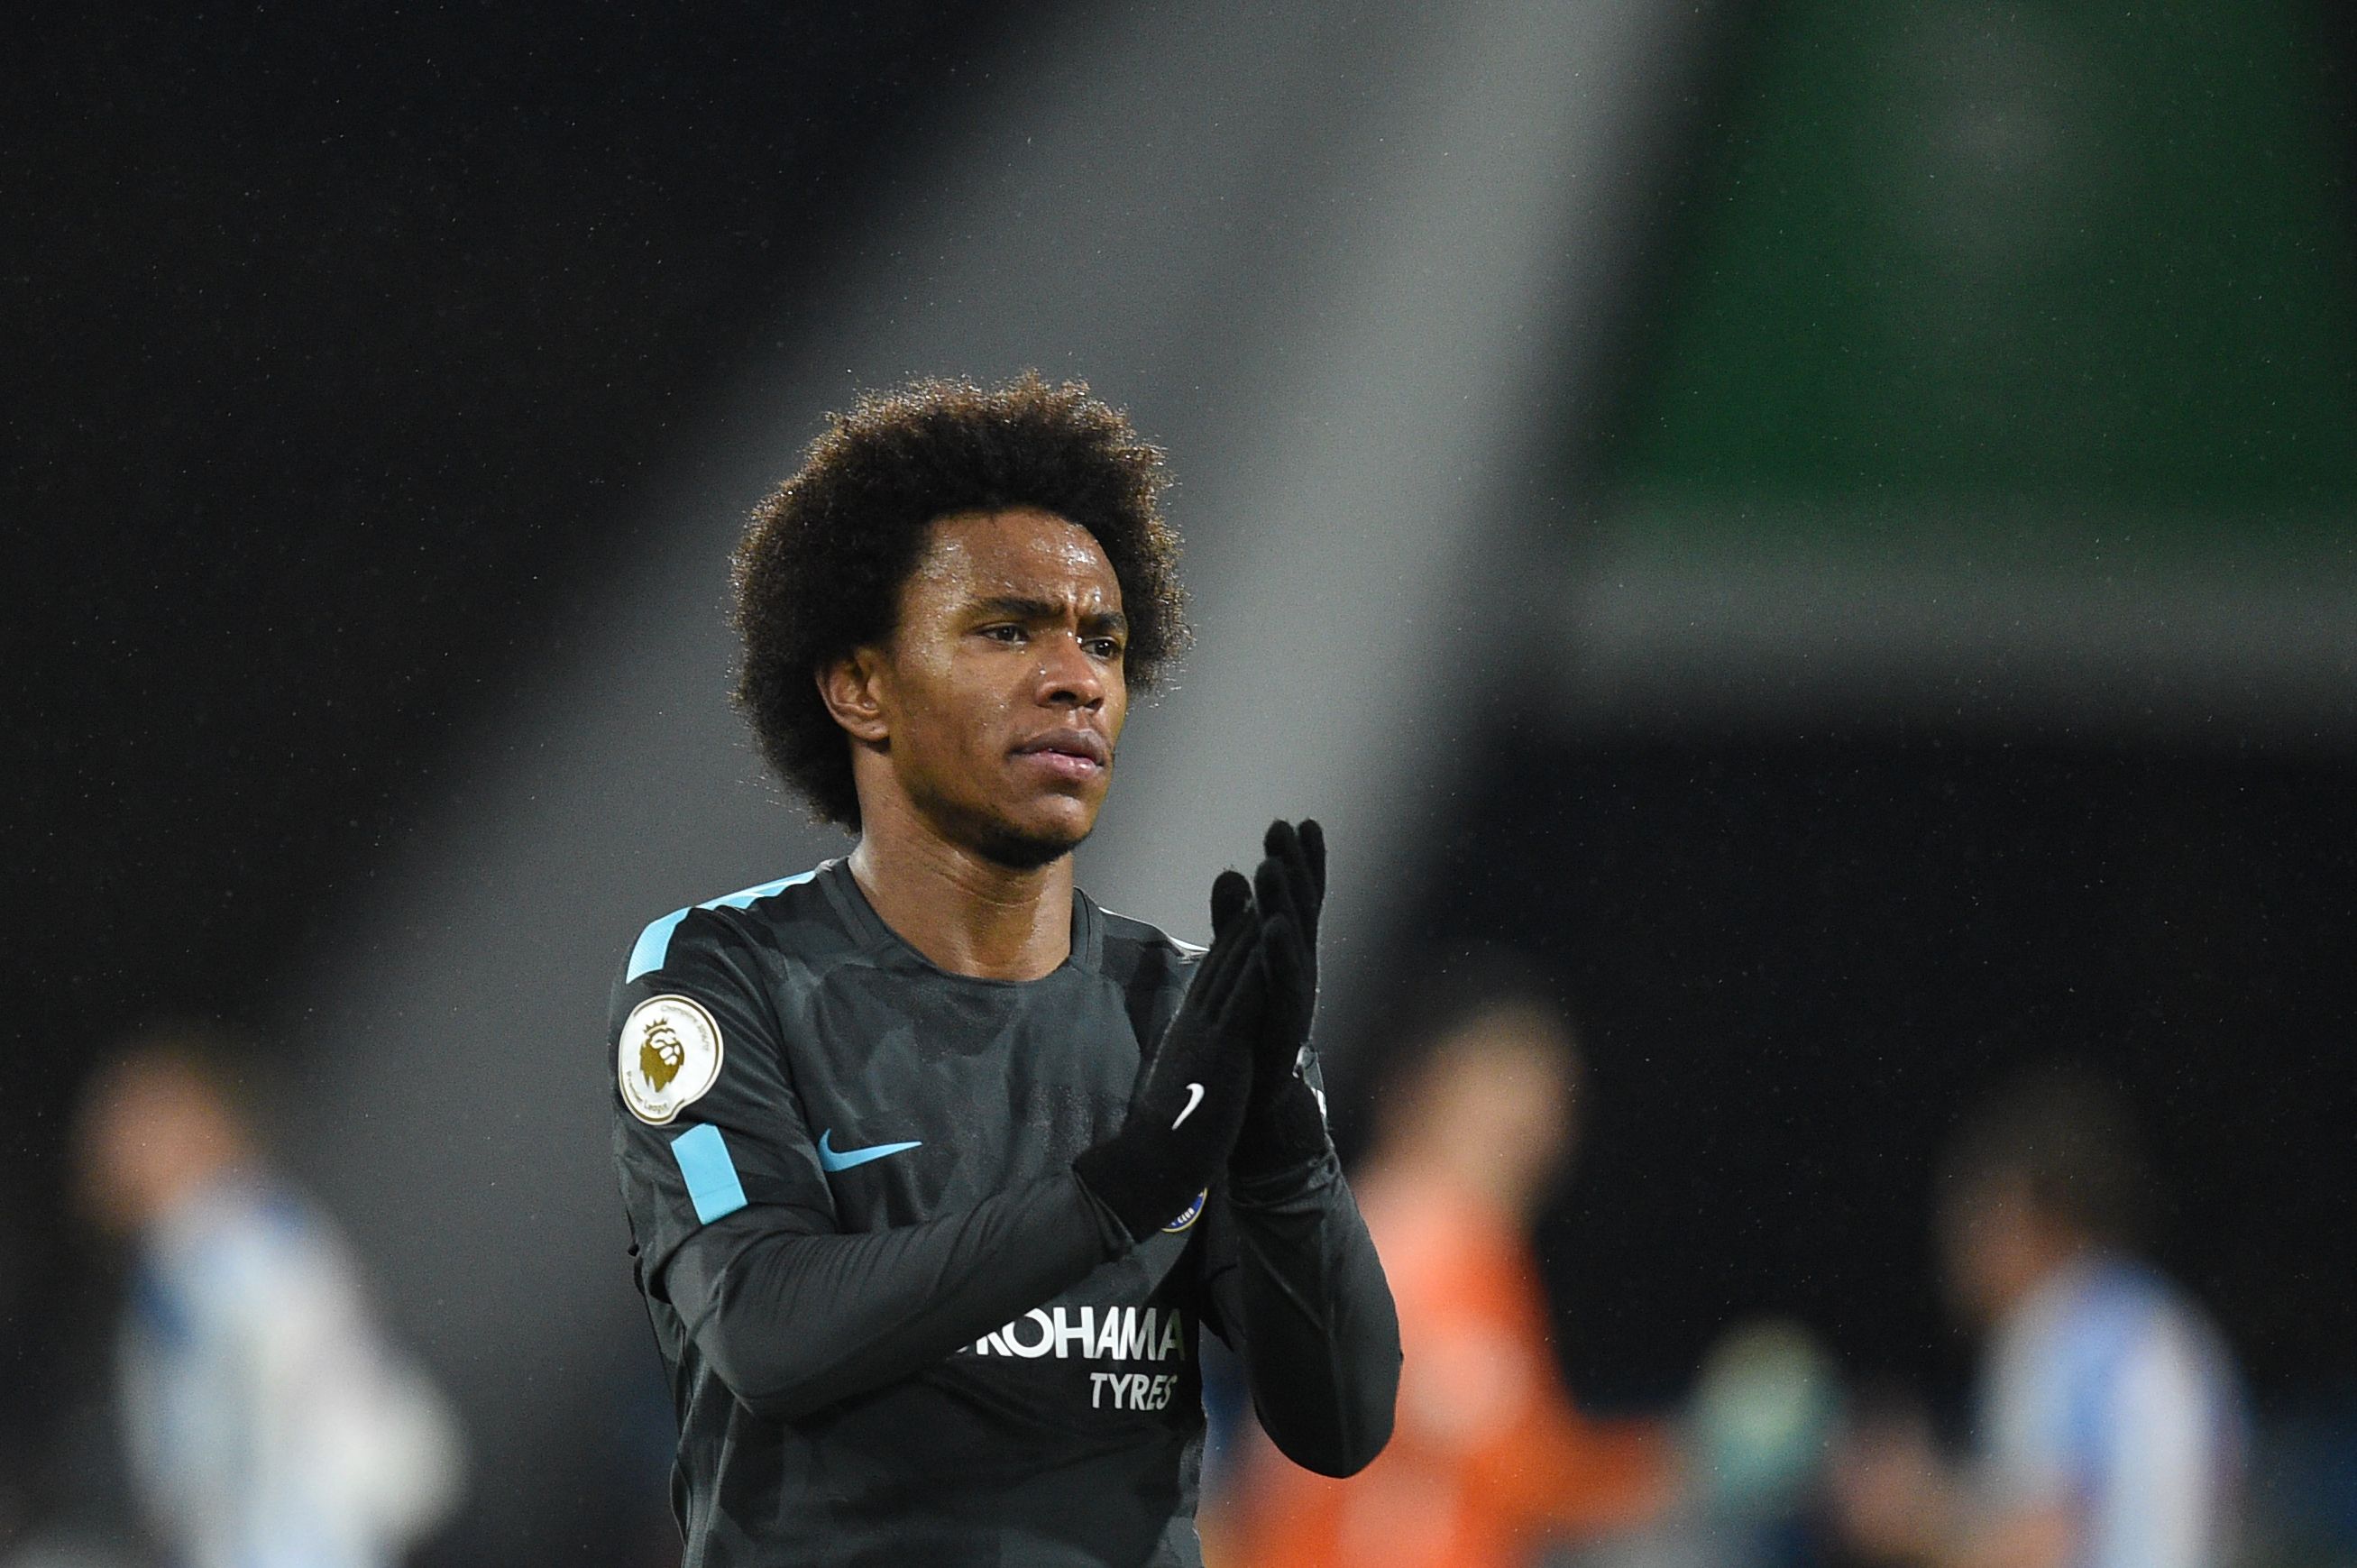 Chelsea's Brazilian midfielder Willian applauds fans after winning the English Premier League football match between Huddersfield Town and Chelsea at the John Smith's stadium in Huddersfield, northern England on December 12, 2017. / AFP PHOTO / Oli SCARFF / RESTRICTED TO EDITORIAL USE. No use with unauthorized audio, video, data, fixture lists, club/league logos or 'live' services. Online in-match use limited to 75 images, no video emulation. No use in betting, games or single club/league/player publications.  /         (Photo credit should read OLI SCARFF/AFP/Getty Images)